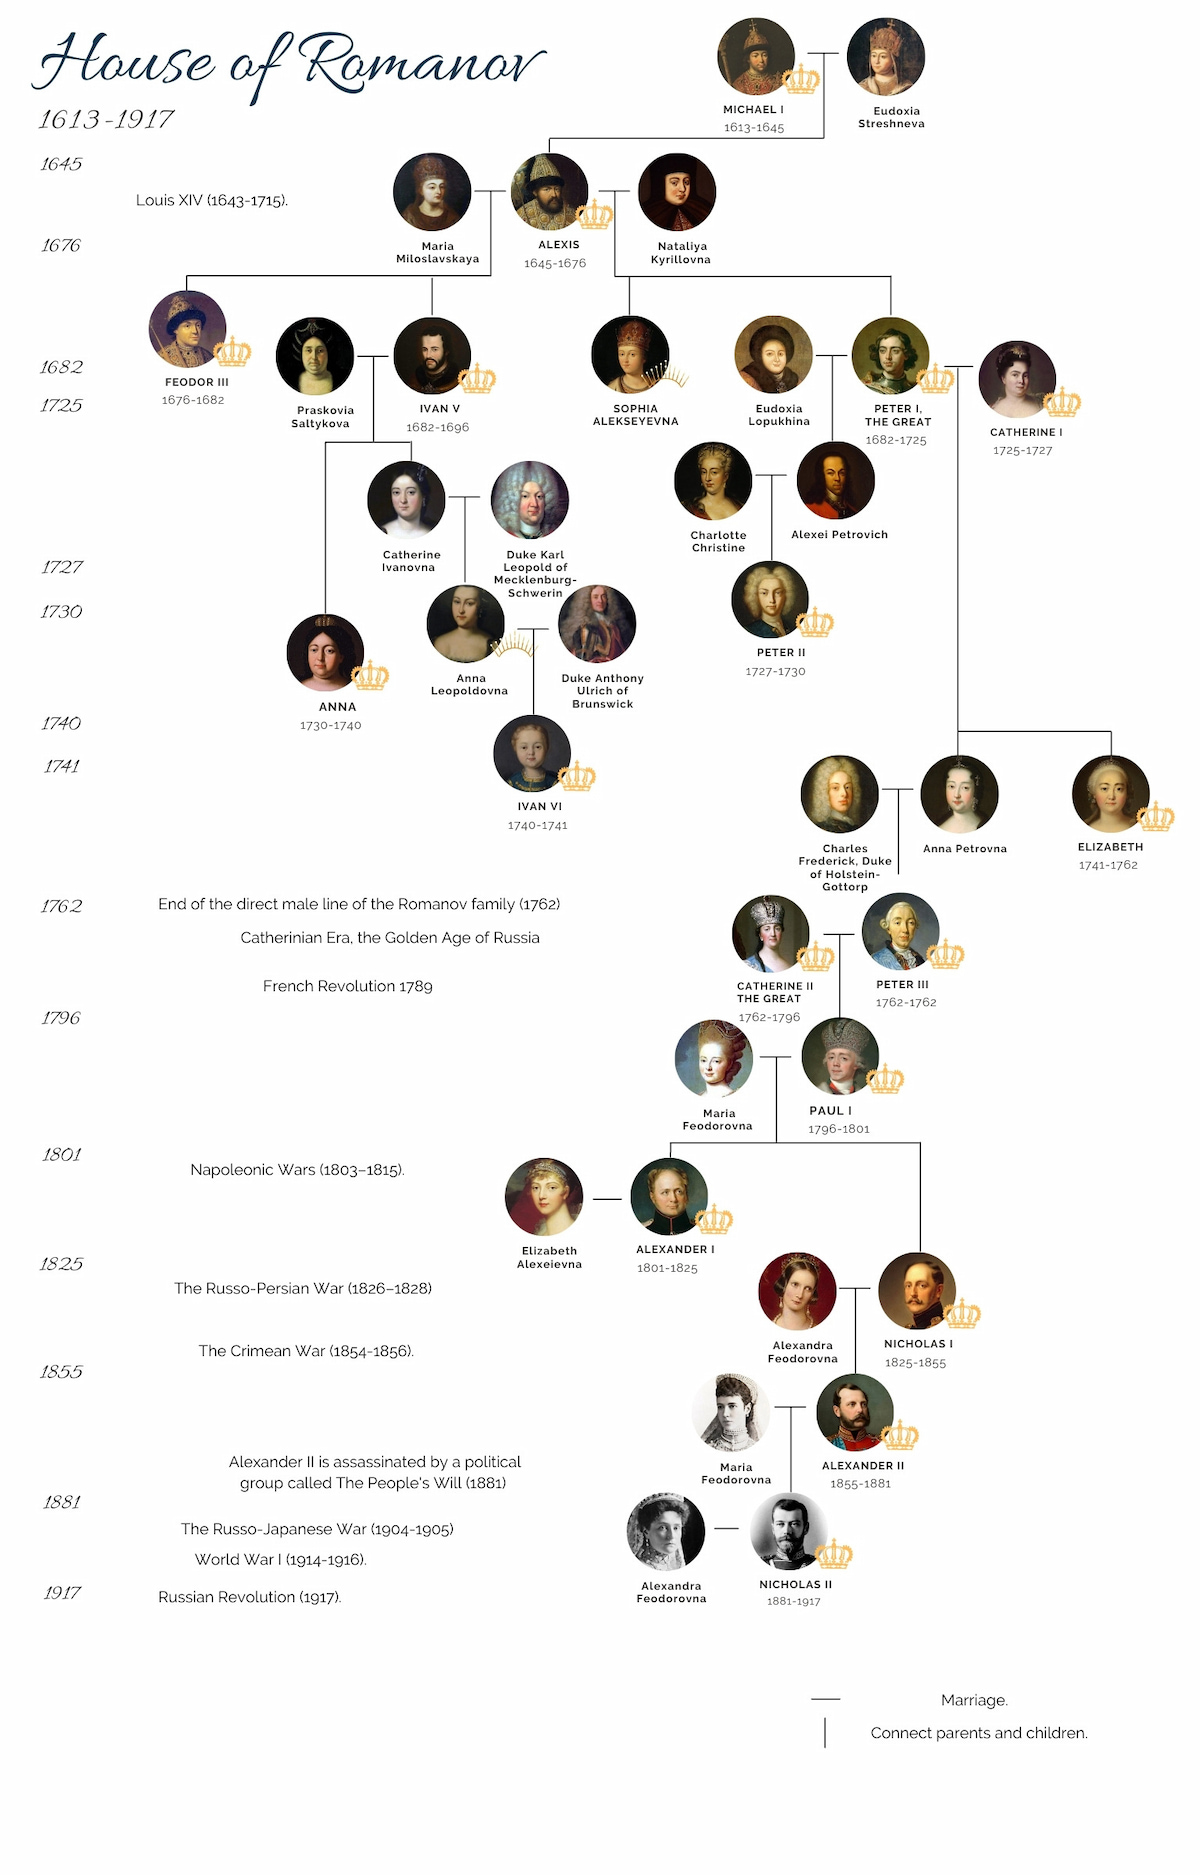 This romanov family tree covers the historical period of Romanov rule over Russia. 